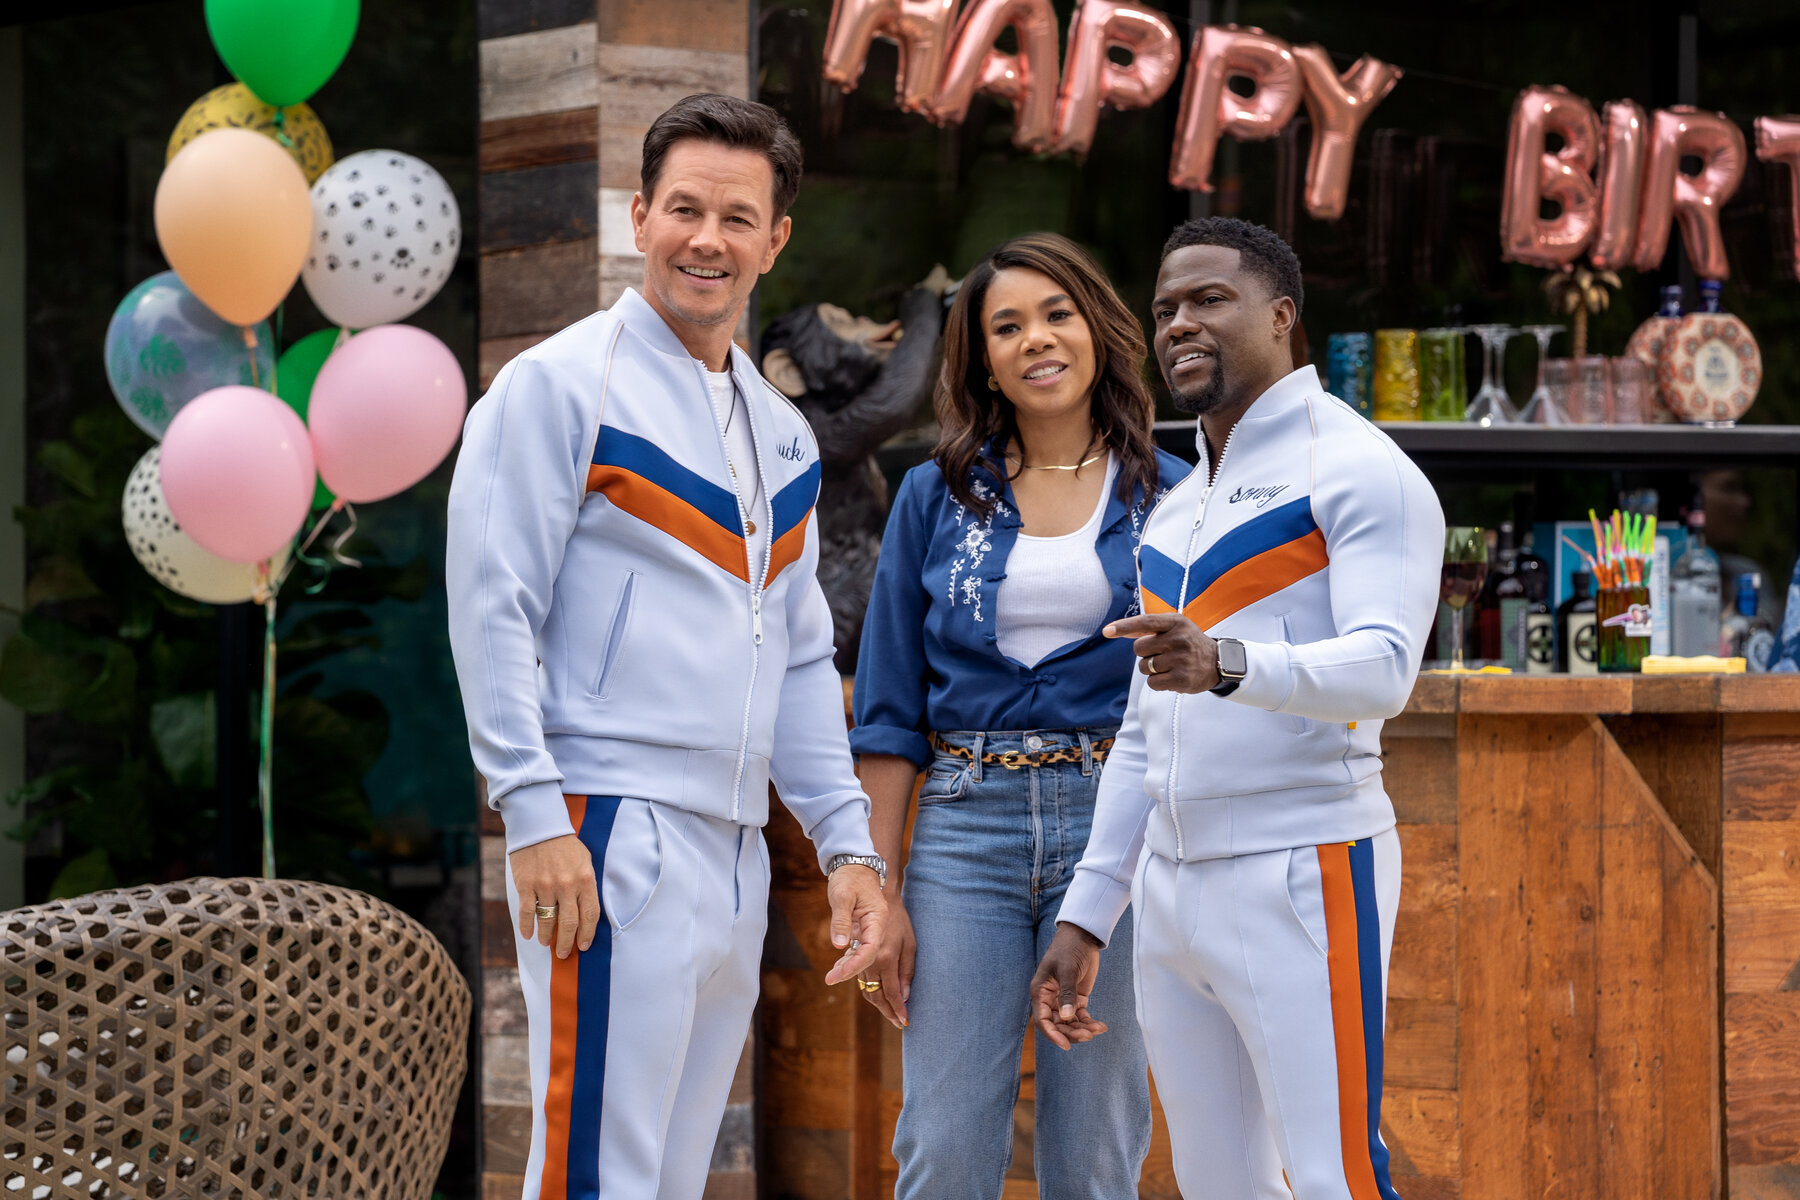 Netflix’s raunchy new movie with Kevin Hart and Mark Wahlberg